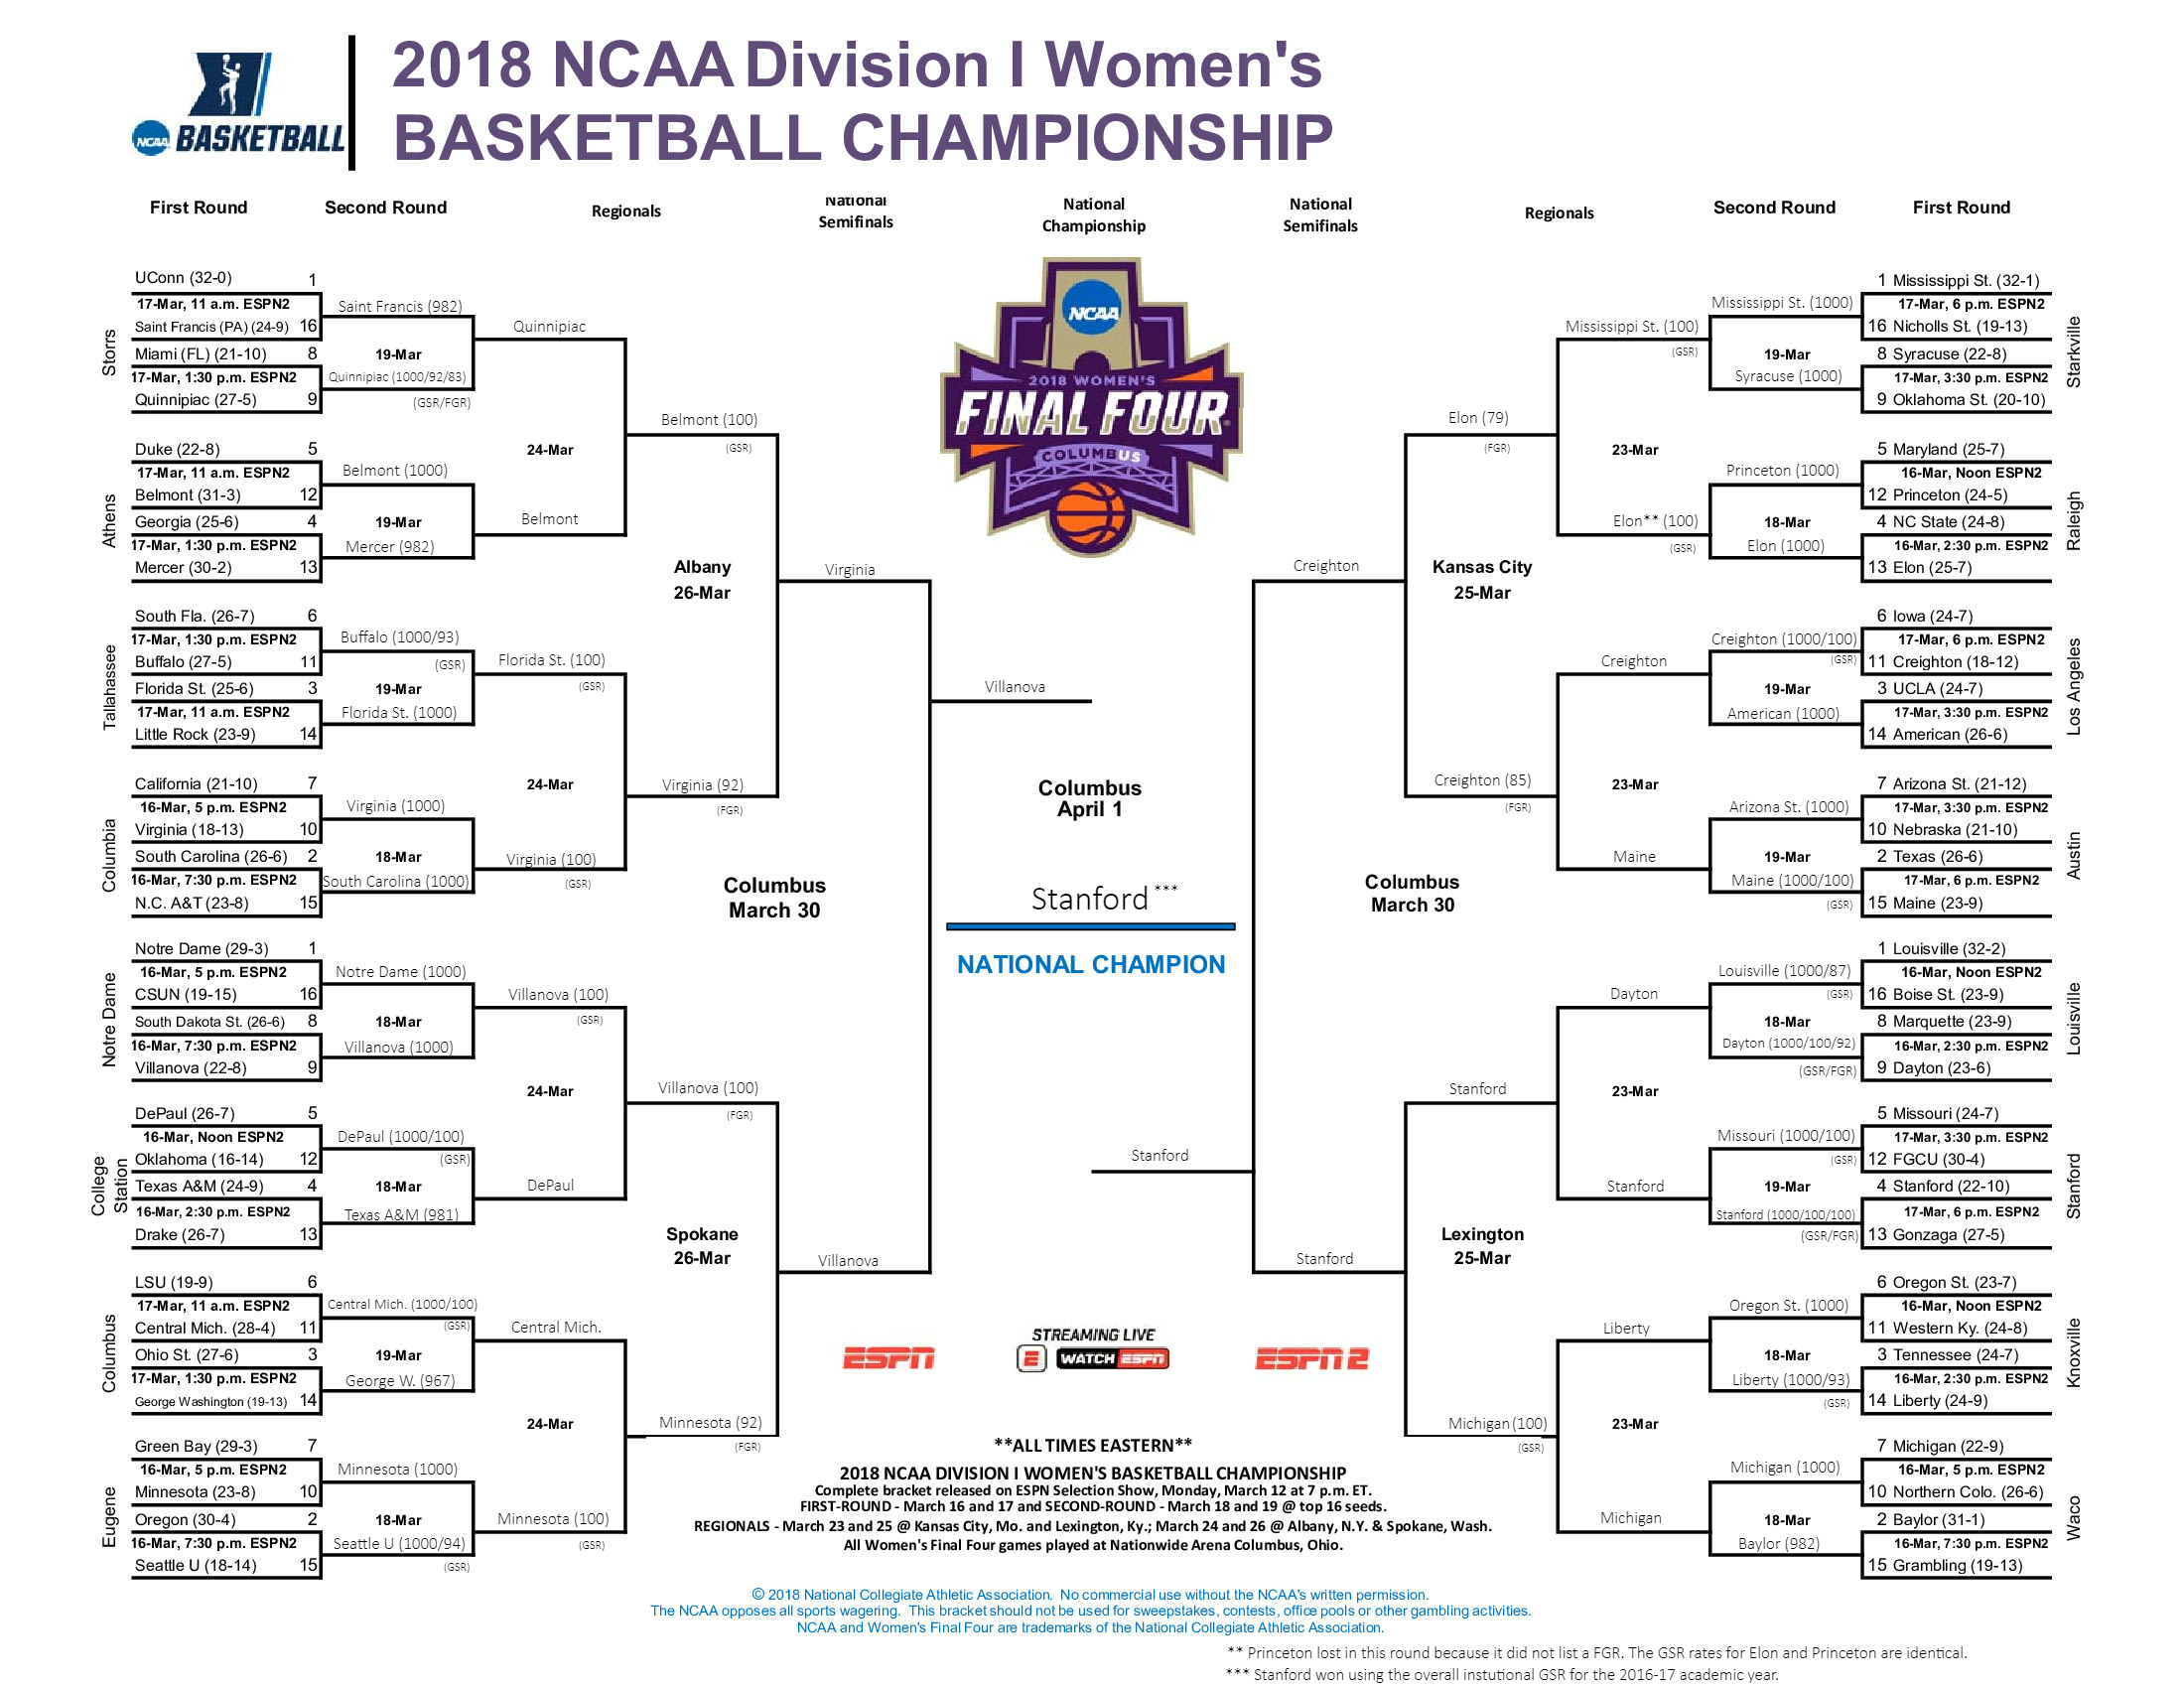 Which team would win the NCAA women's basketball tournament if